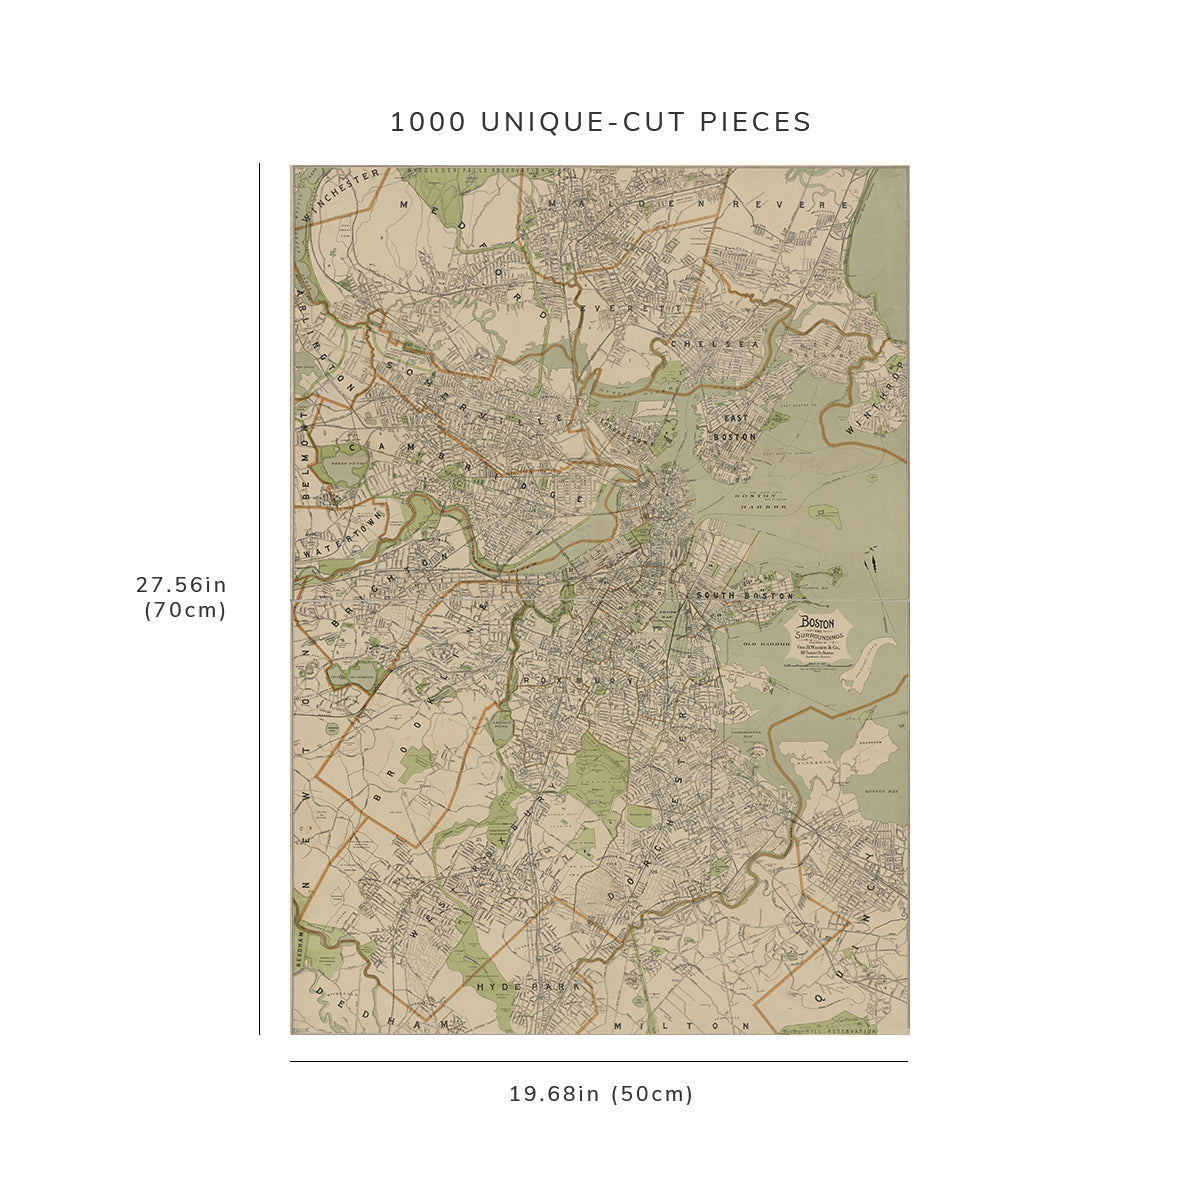 1000 Piece Jigsaw Puzzle: 1896 Map of 160 Tremont St. Boston Boston and surroundings